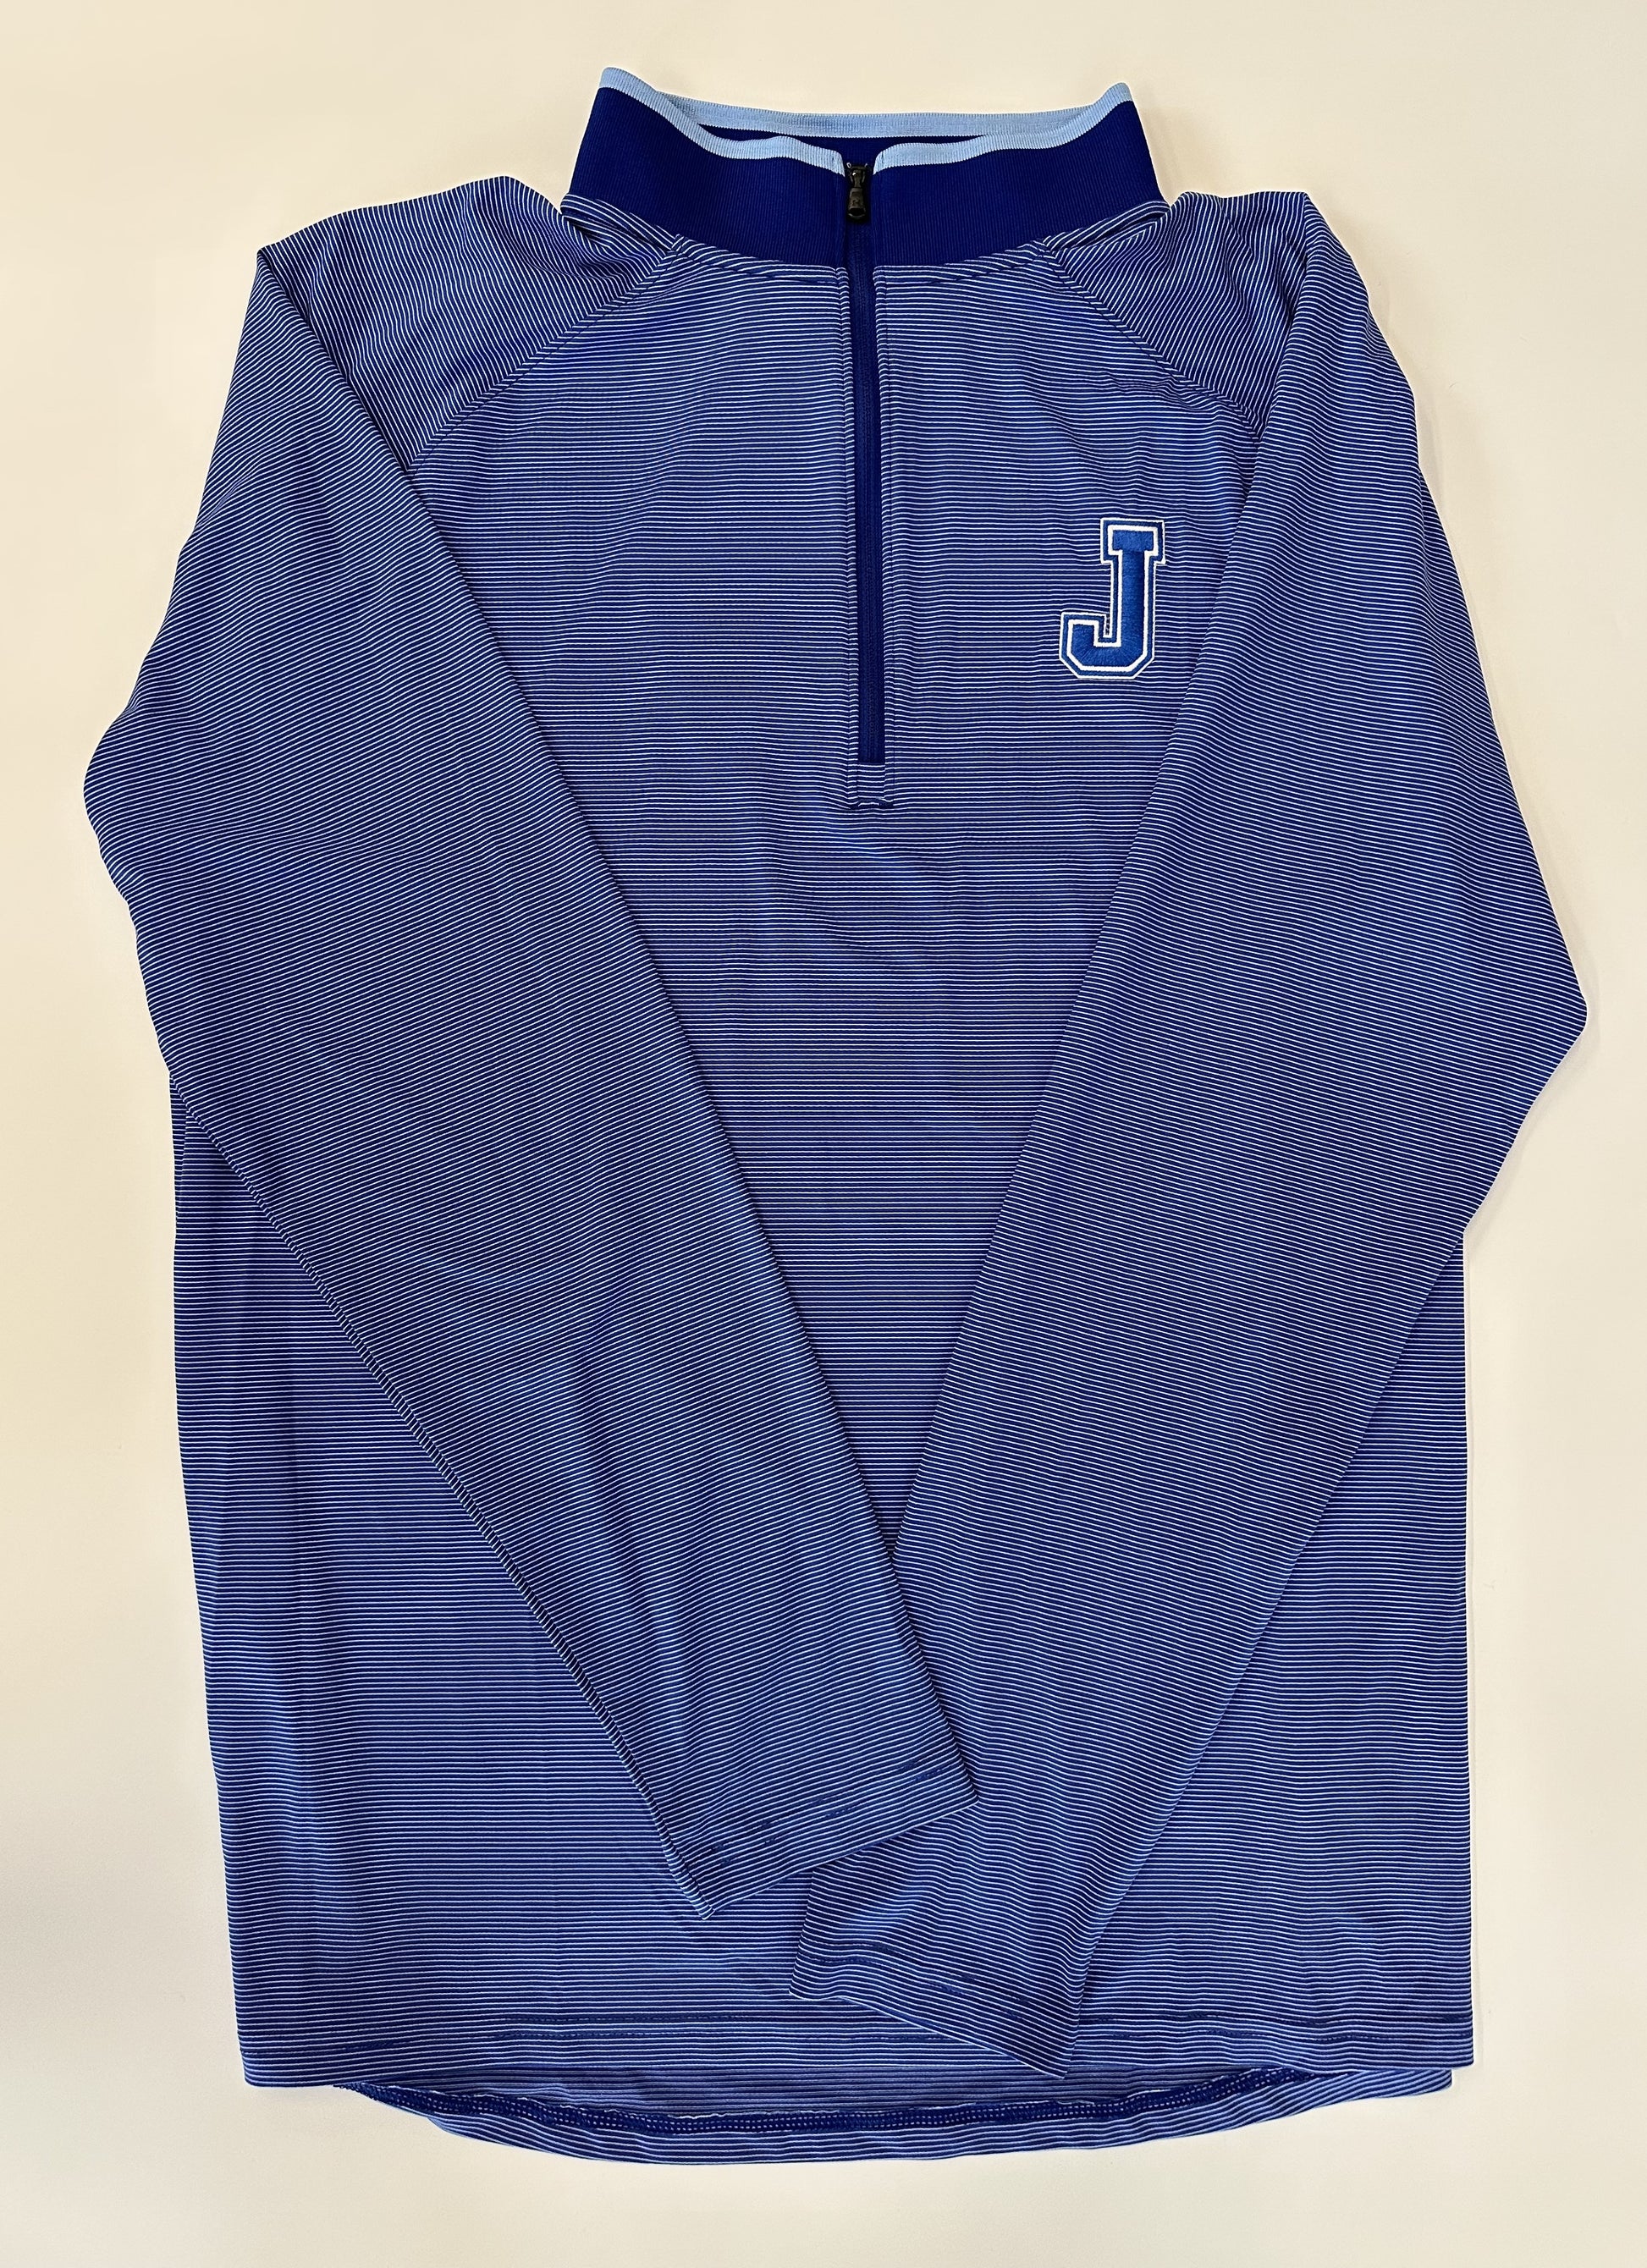 Under Armour.  88% Polyester/12% Elastane  Performance Fabric.  Embroidered J logo.